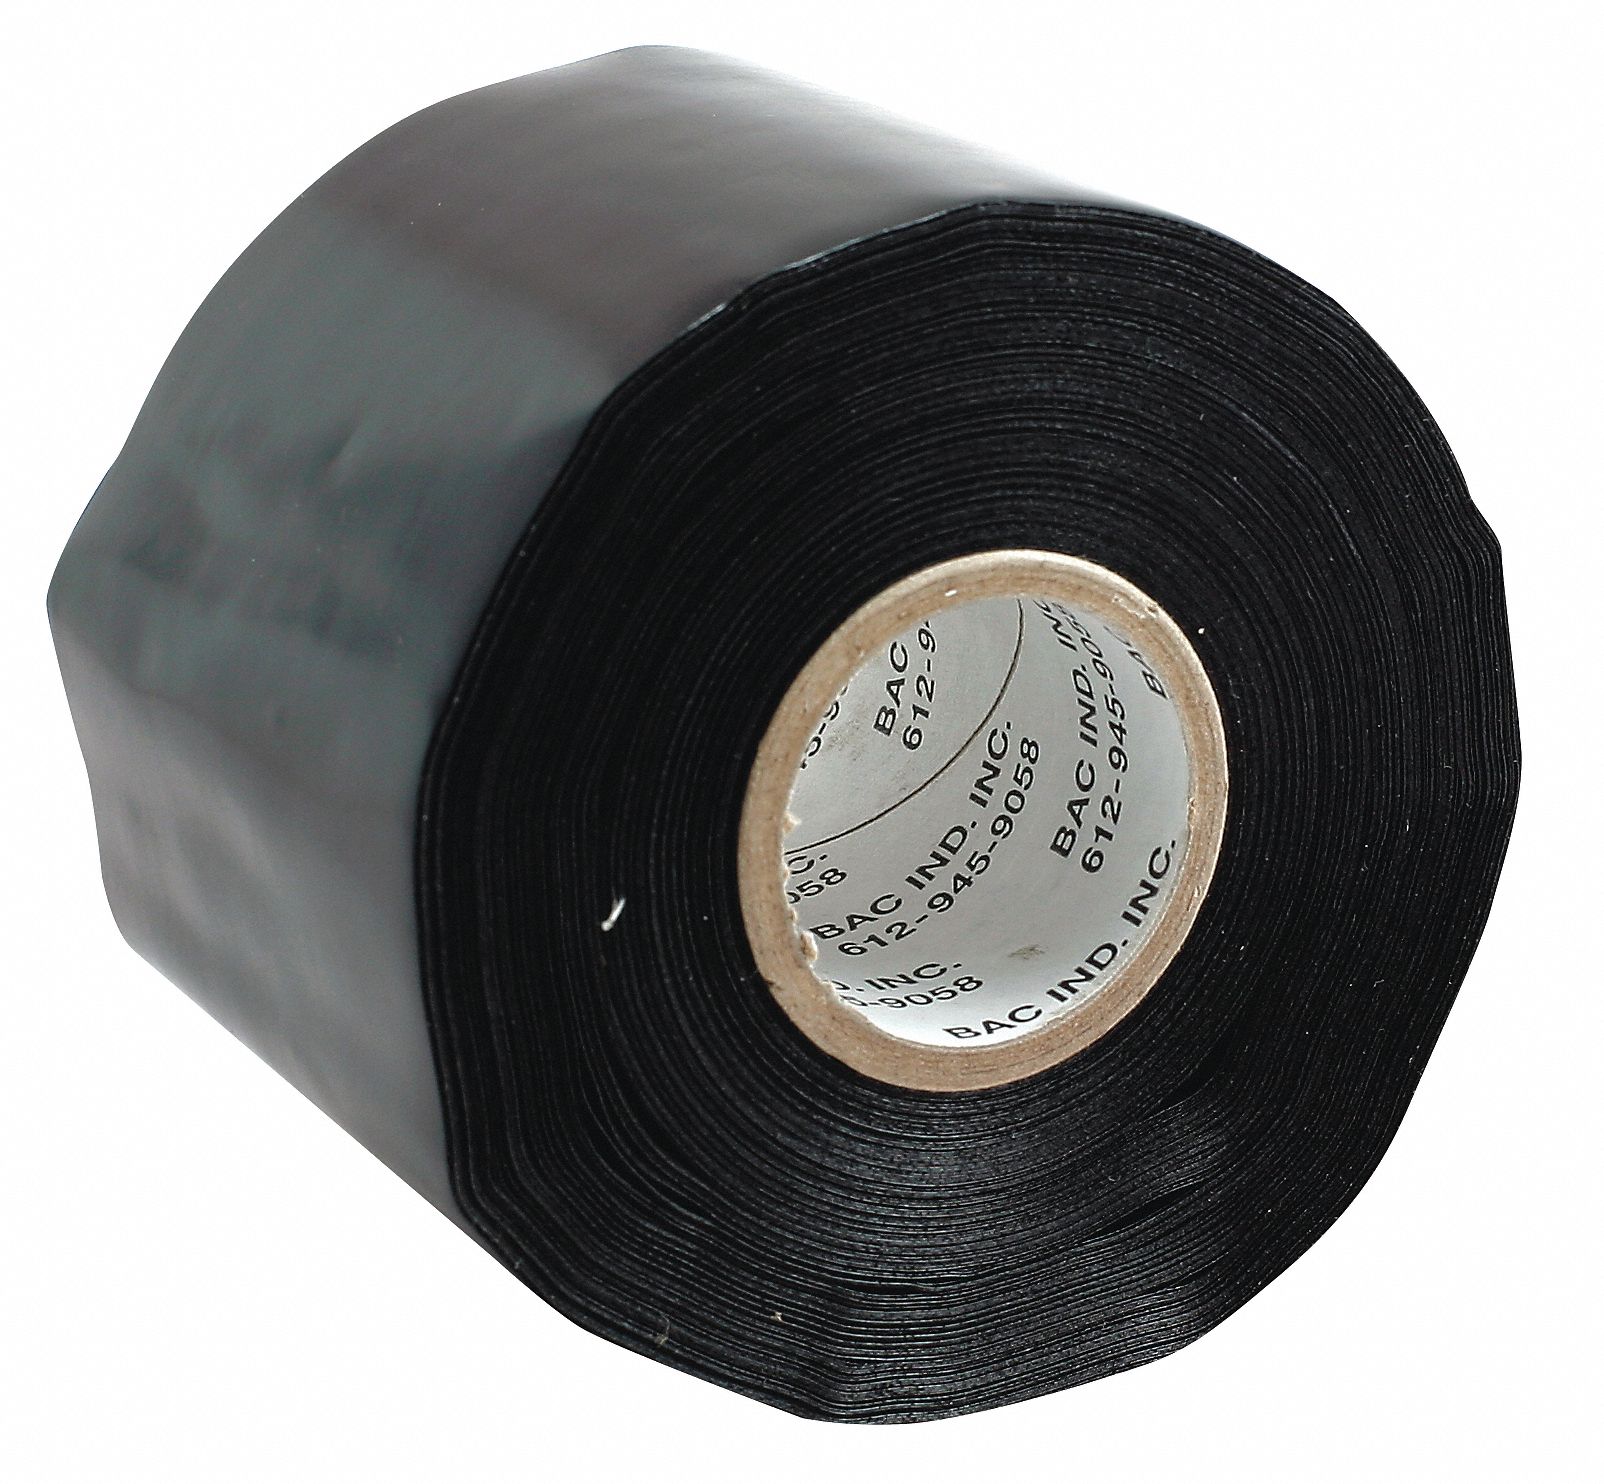 Duct Tape: BAC Industries Inc., Series TBL, Light Duty, 3 in x 36 yd, Black, Continuous Roll